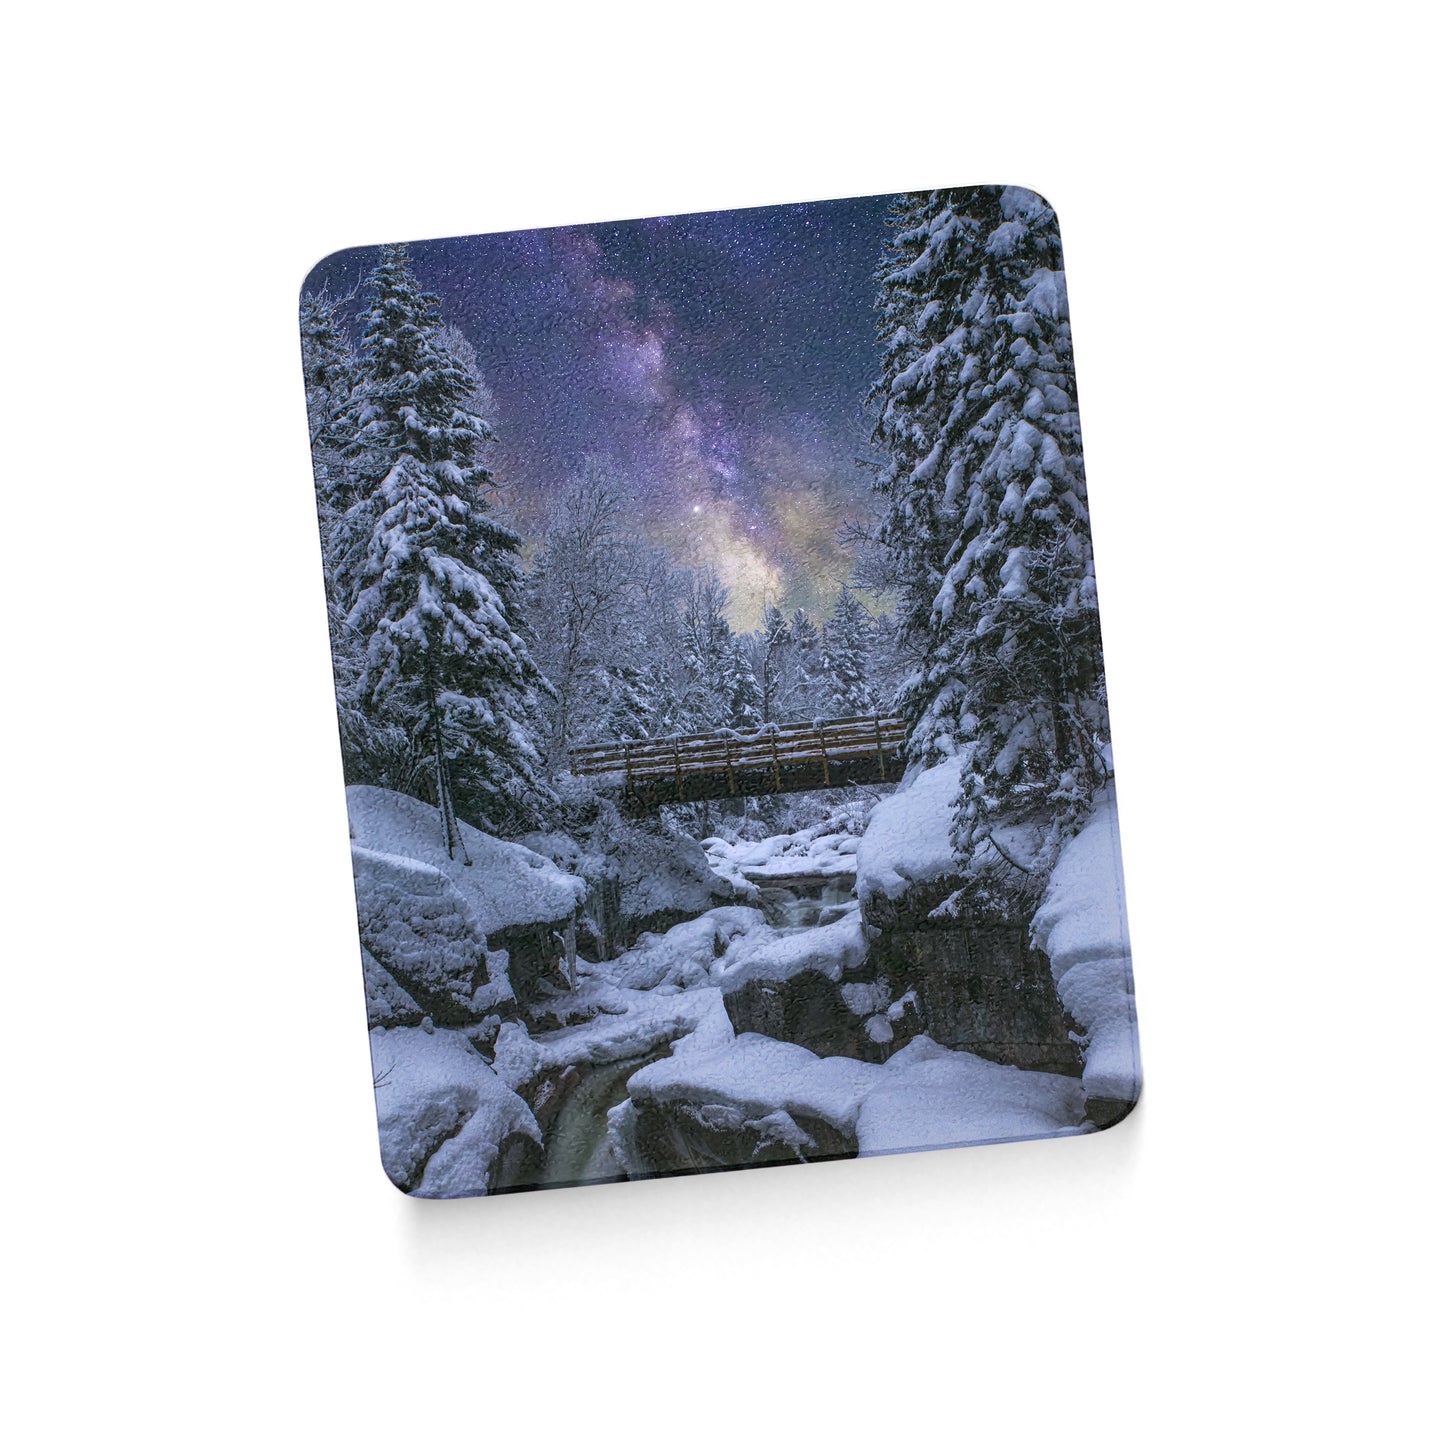 Milky Way Upper Falls Cutting Board by Chris Whiton